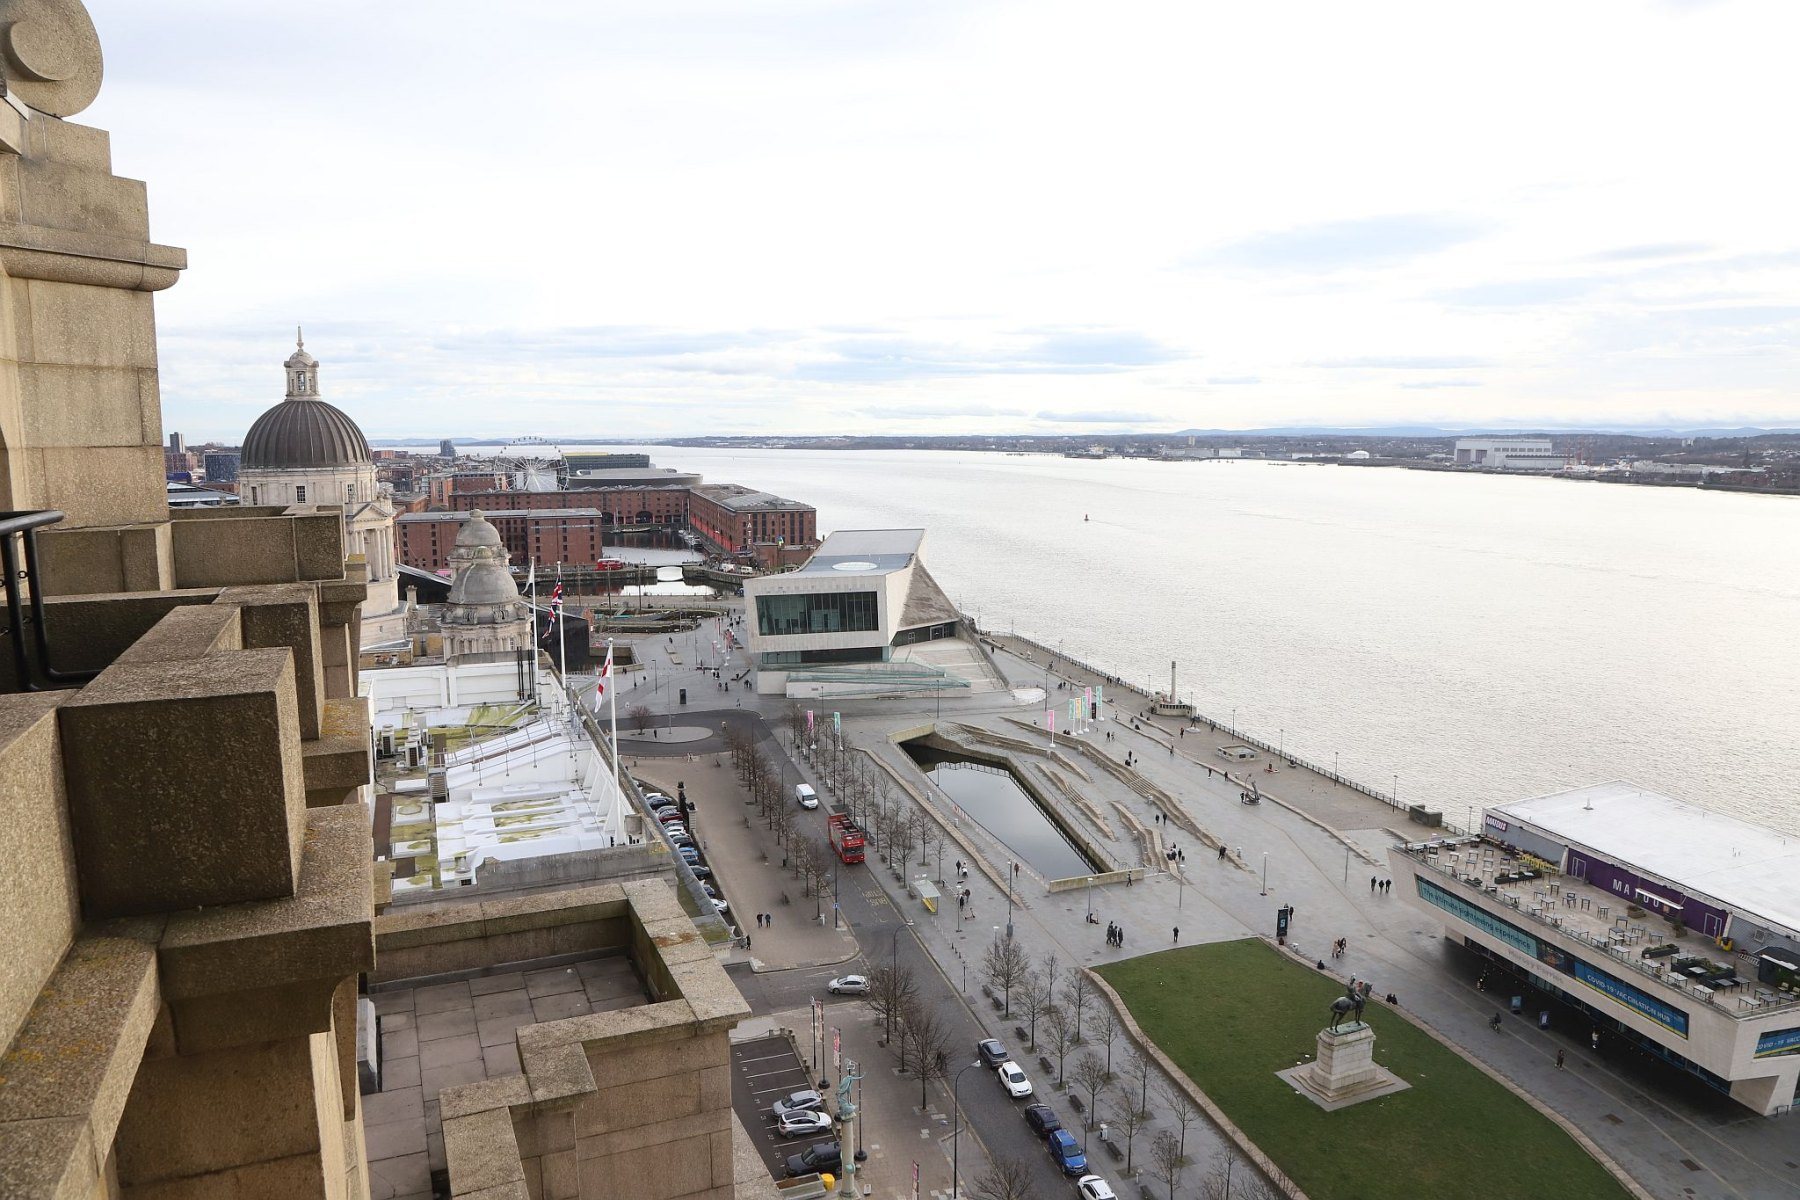 Royal Liver Building 360 Tower Tour looking down on the Liverpool waterfront and Pier Head